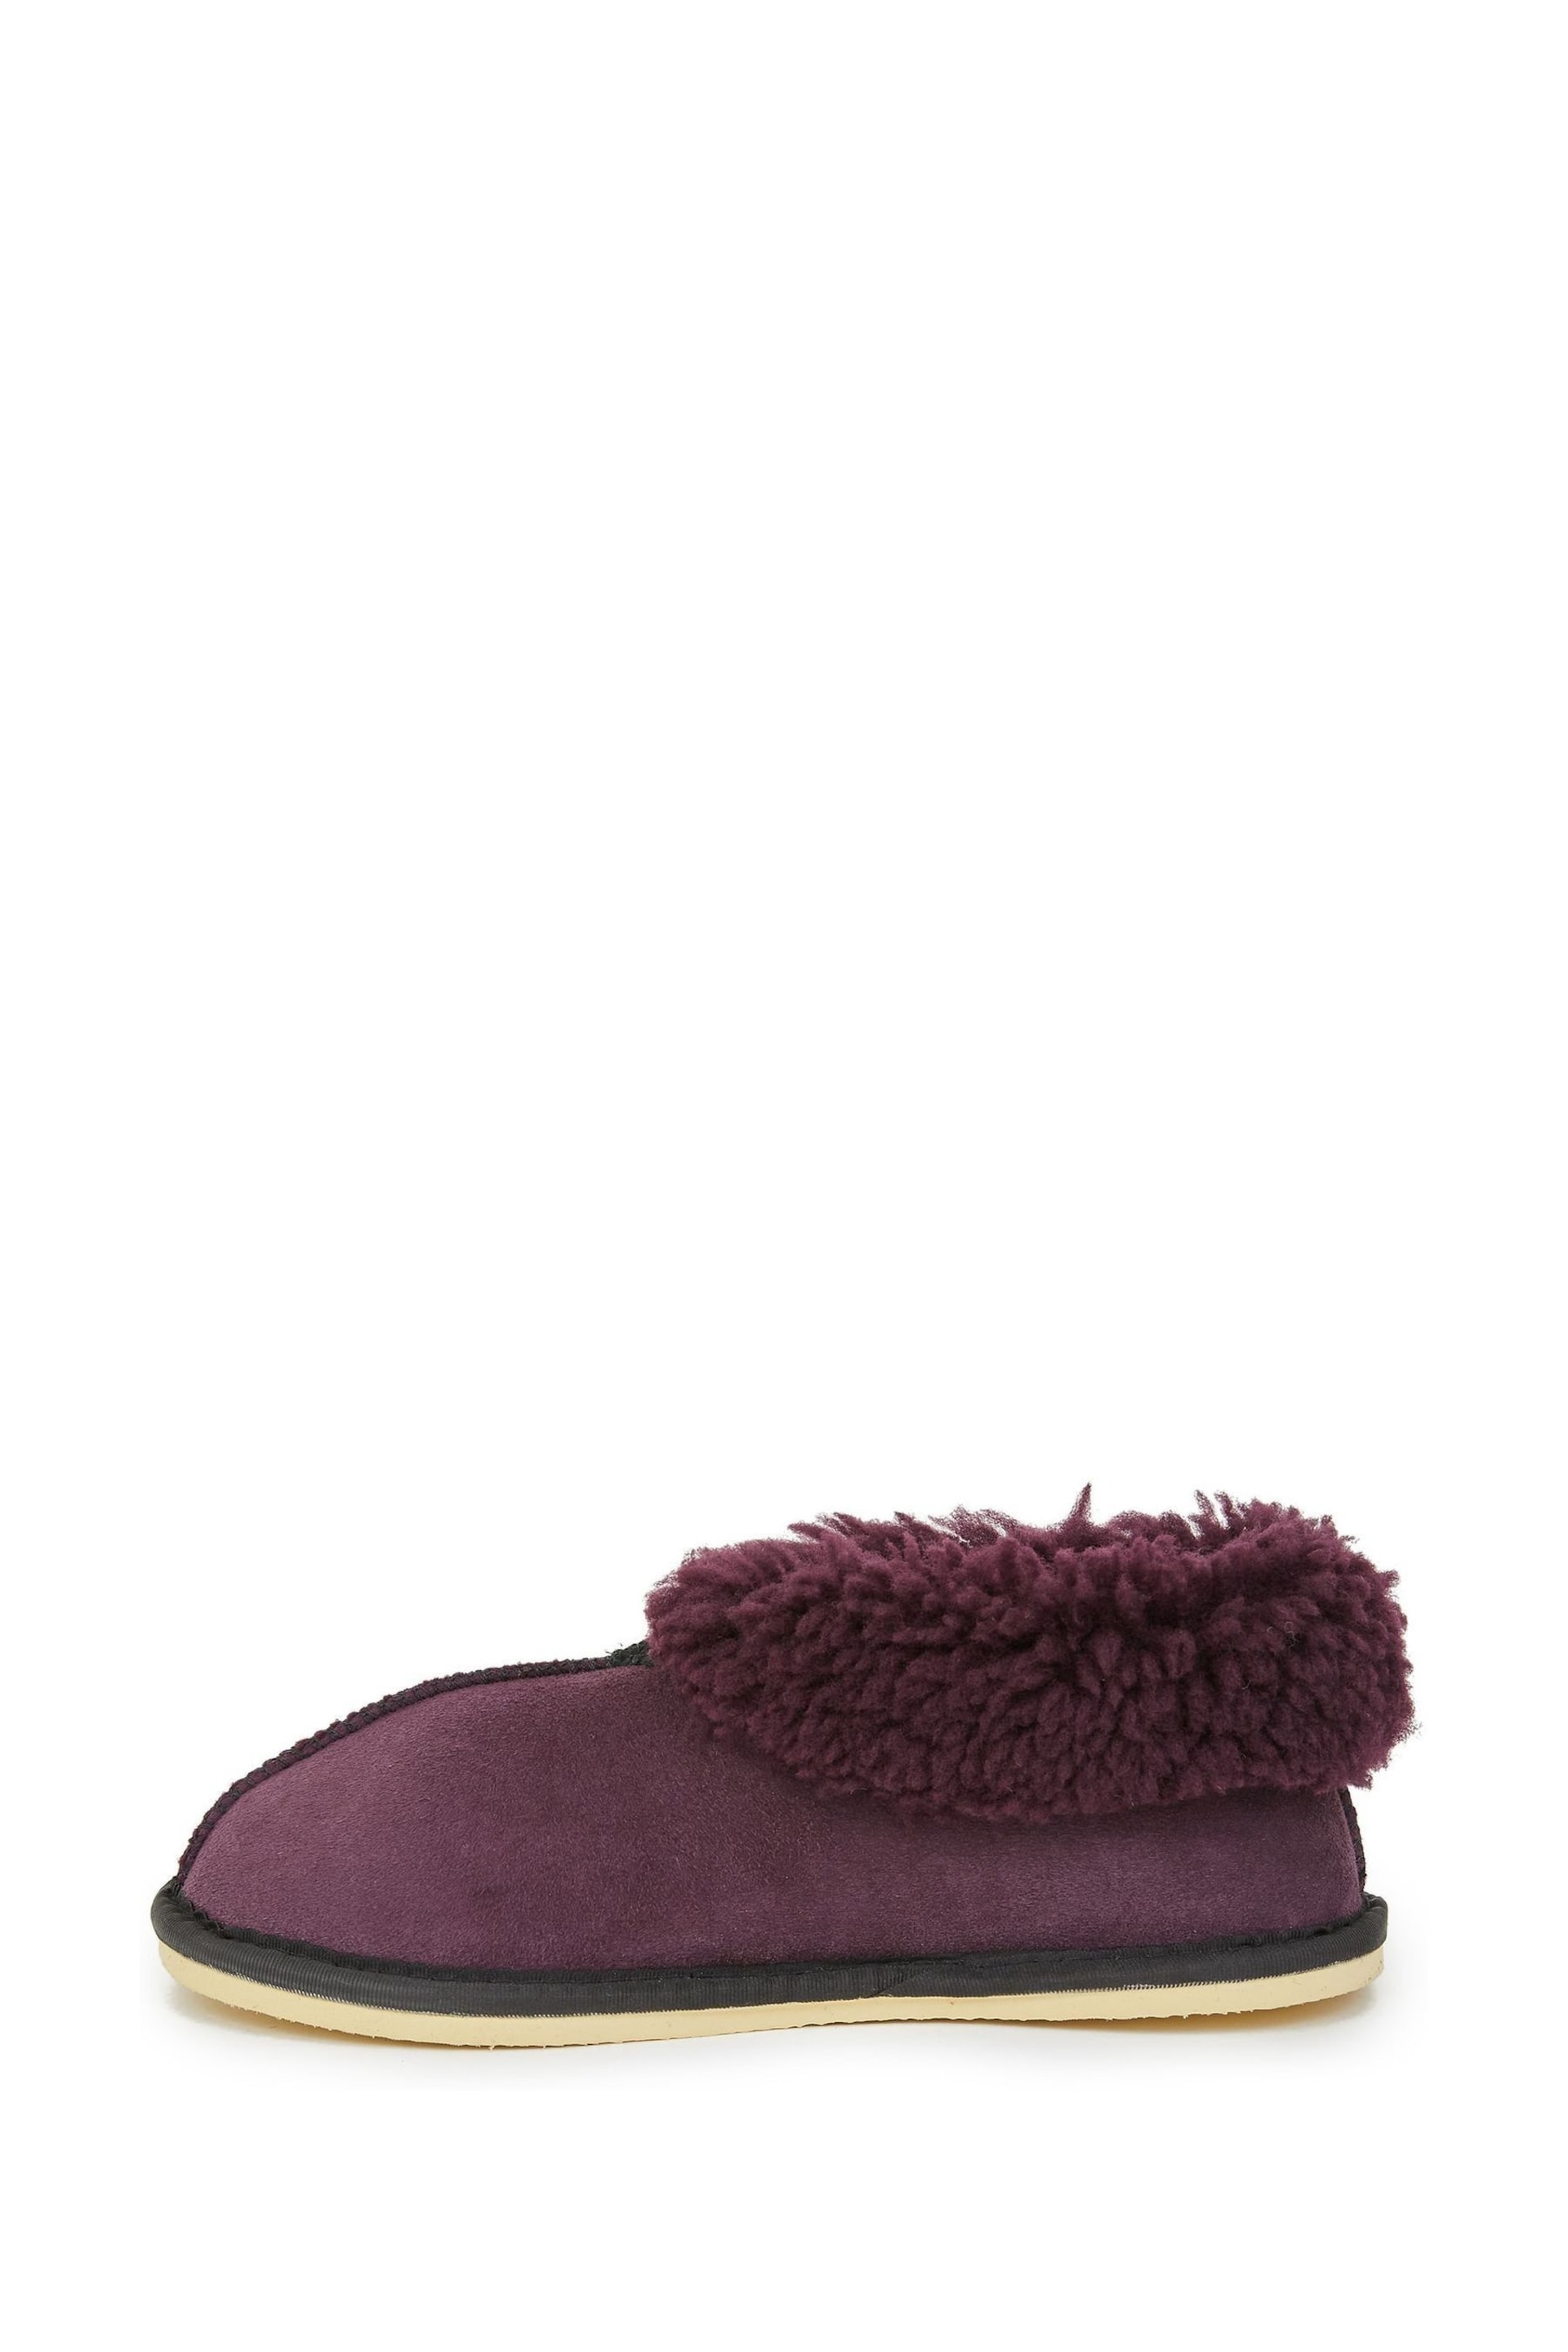 Celtic & Co. Ladies Pink Sheepskin Bootee Slippers - Image 2 of 6